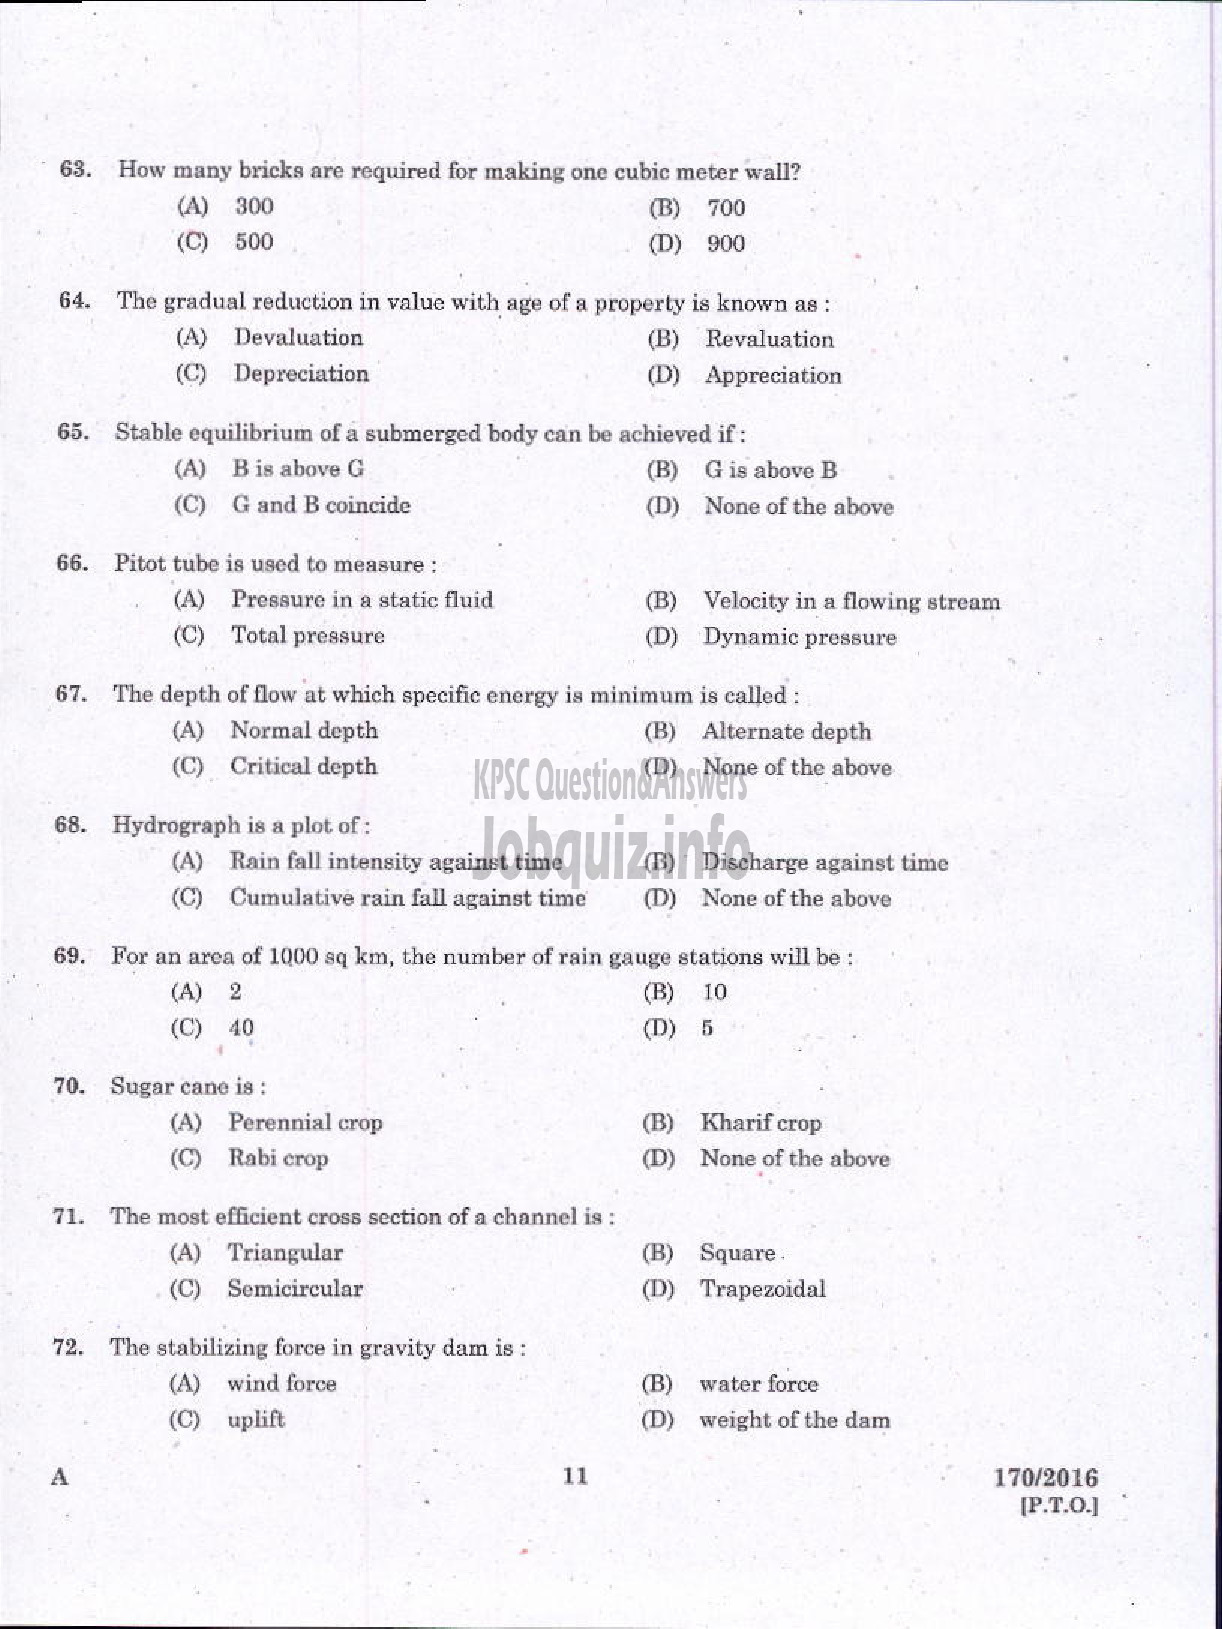 Kerala PSC Question Paper - LECTURER IN CIVIL ENGINEERING GOVT POLYTECHNICS TECHNICAL EDUCATION-9